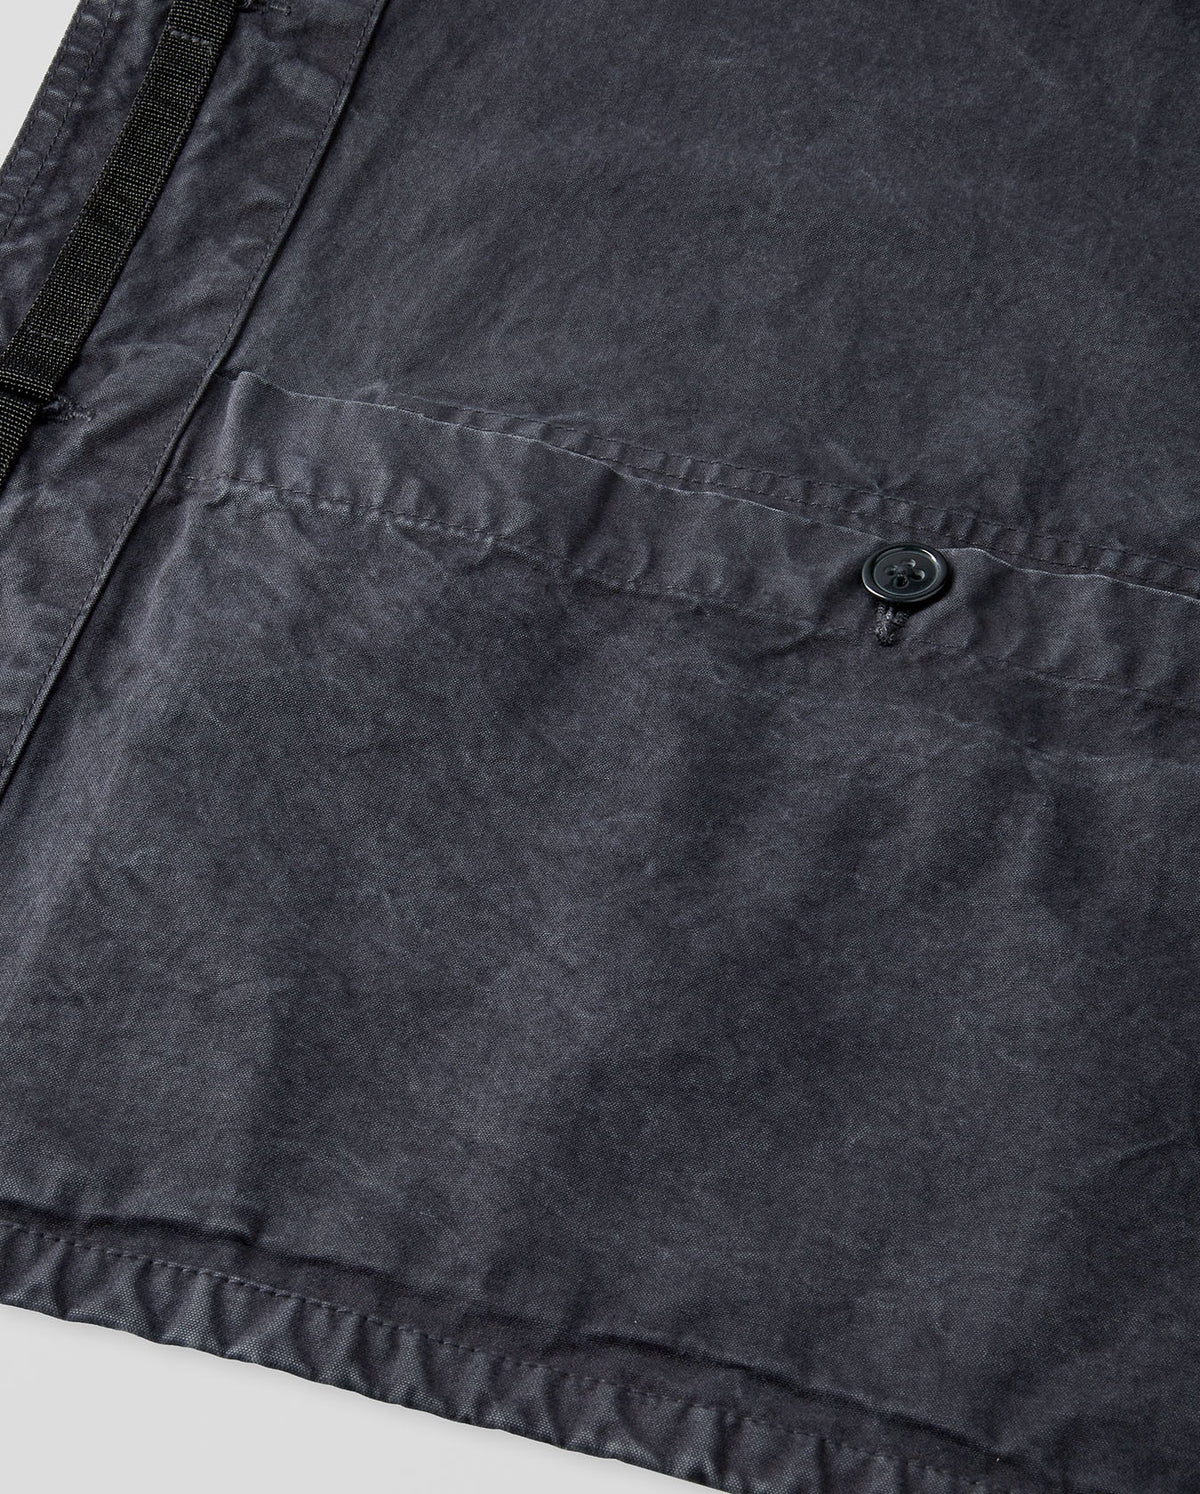 Relaxed Fit Chore Jacket - Washed Charcoal